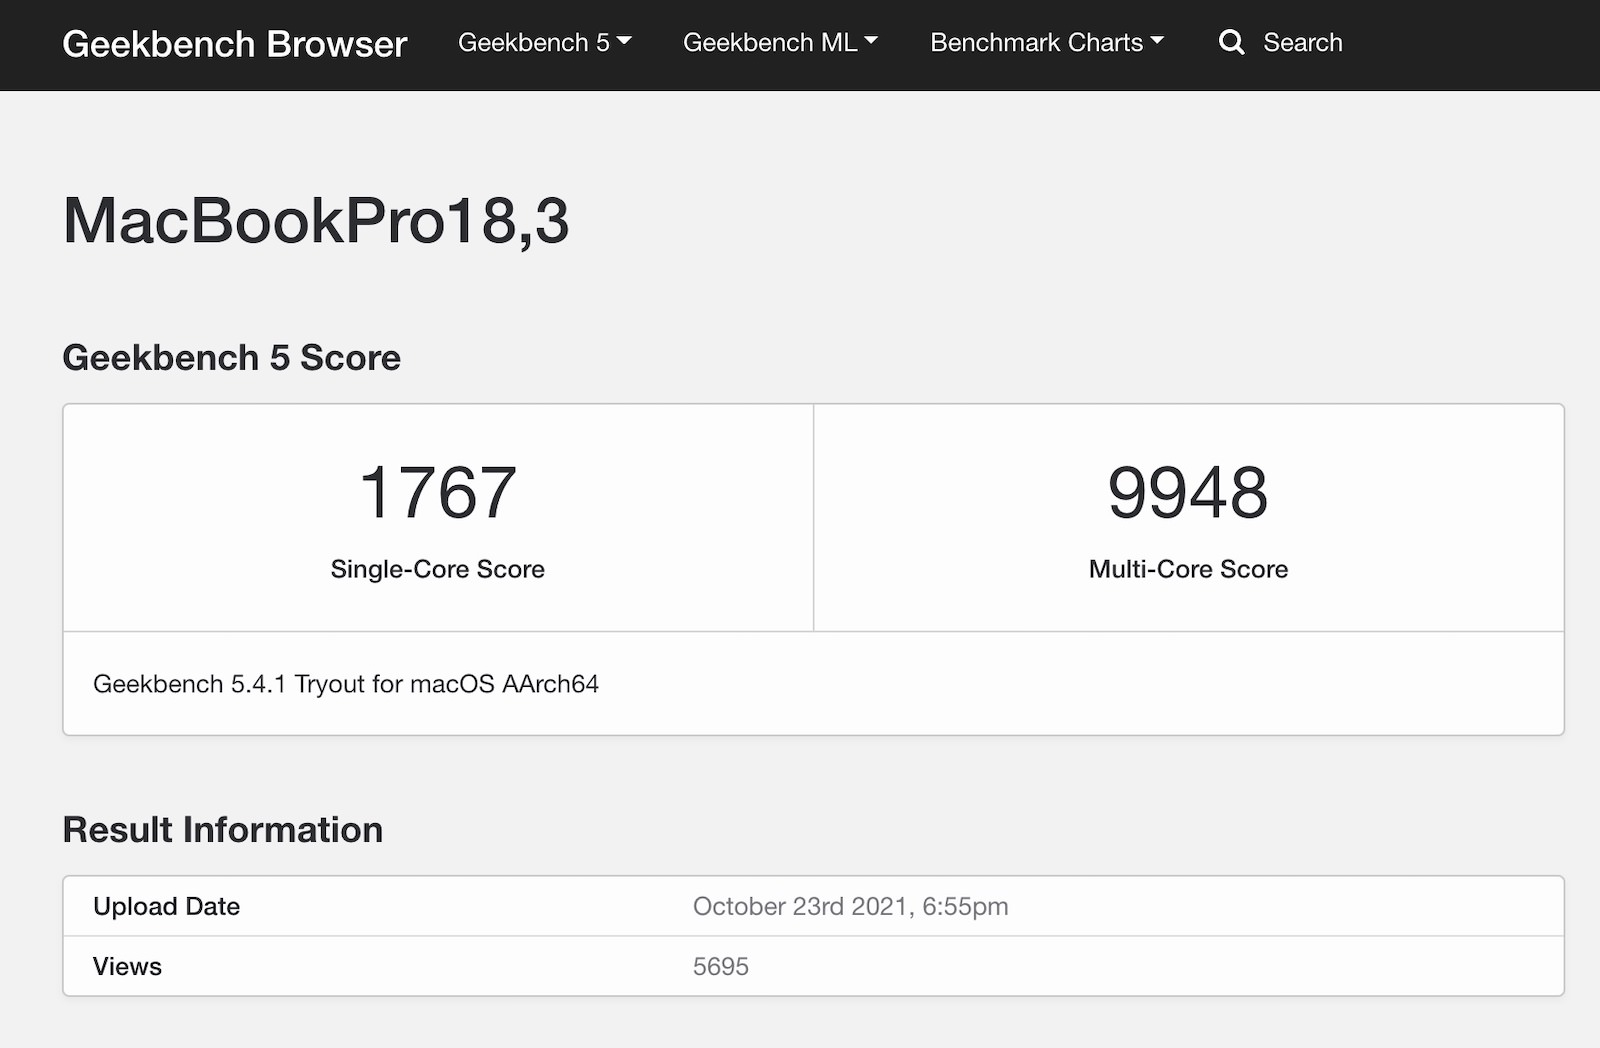 geekbench-5-scores-for-8core-mbp.jpg